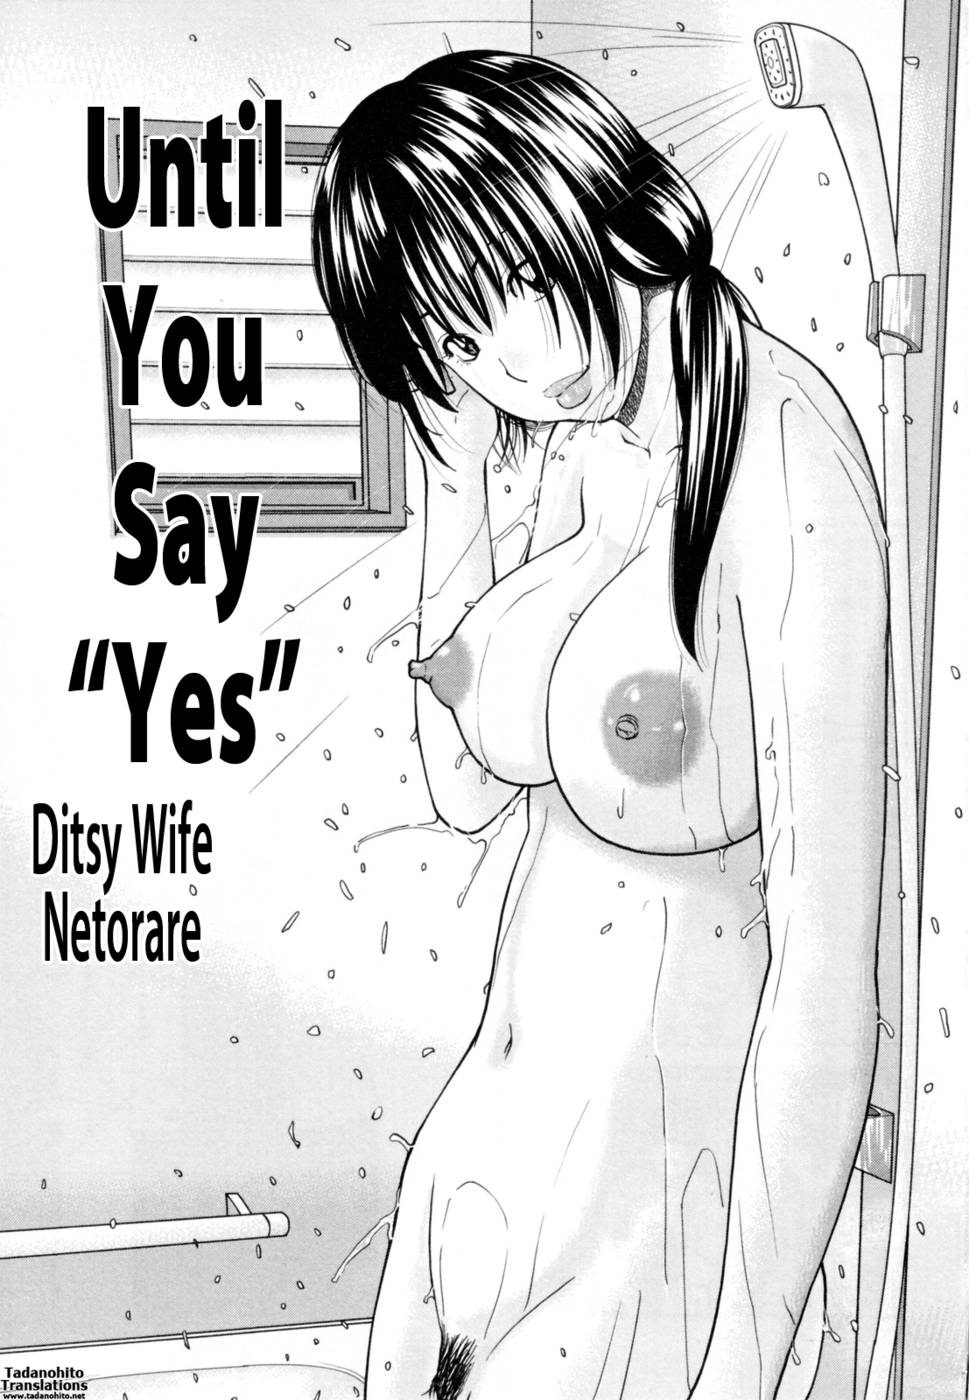 Hentai Manga Comic-32 Year Old Unsatisfied Wife-Chapter 1-Until You Say Yes-7